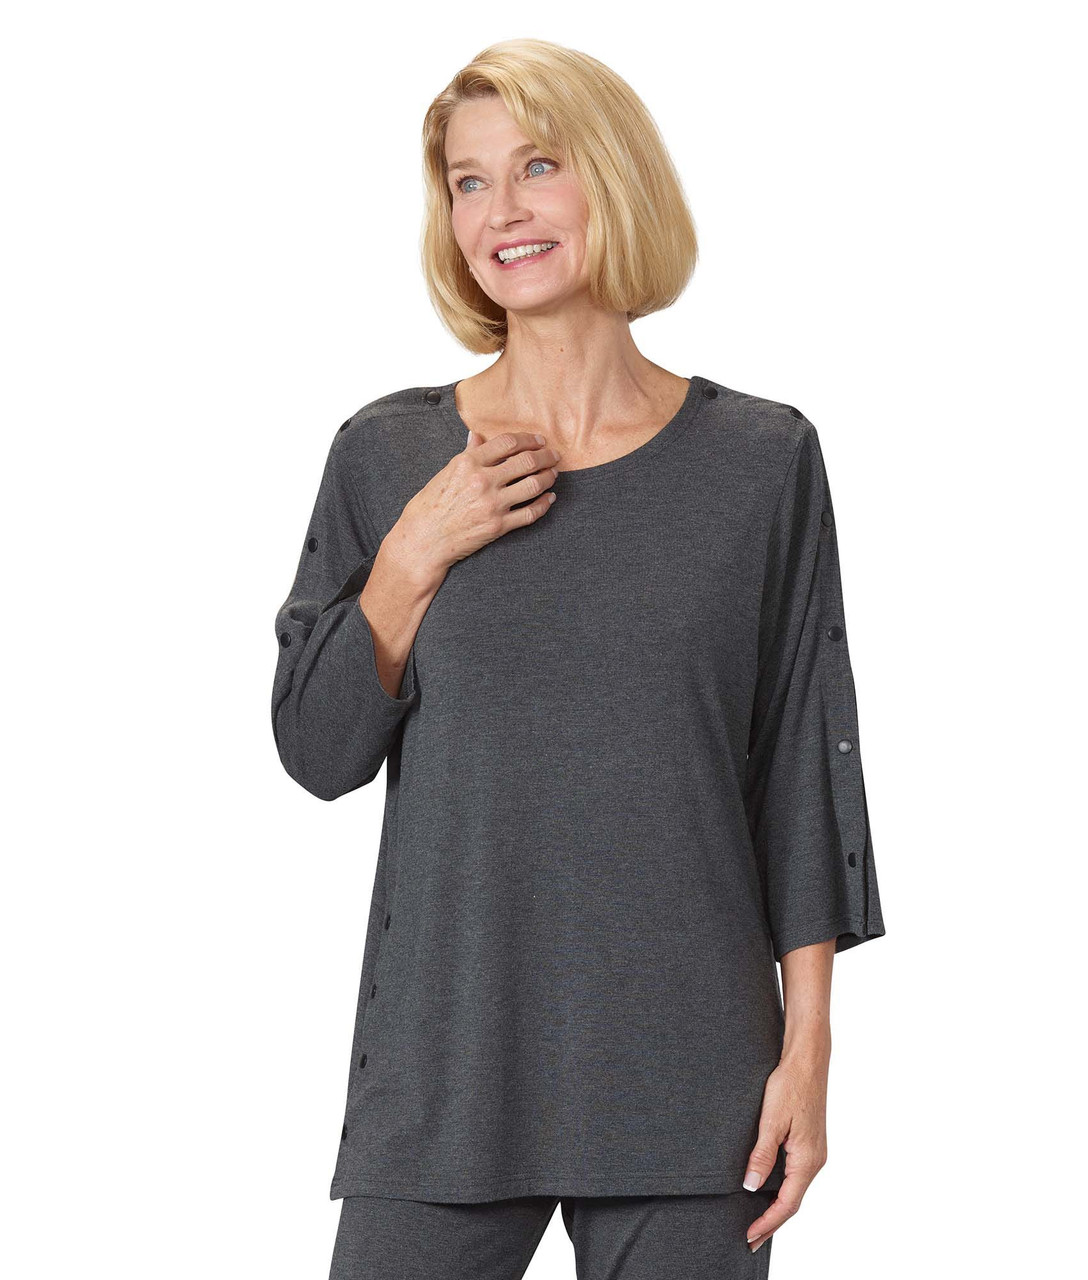 Silverts SV61000 Womens Post-Surgical Top With Snaps Heather Gray, Size=M, SV61000-SV1456-M